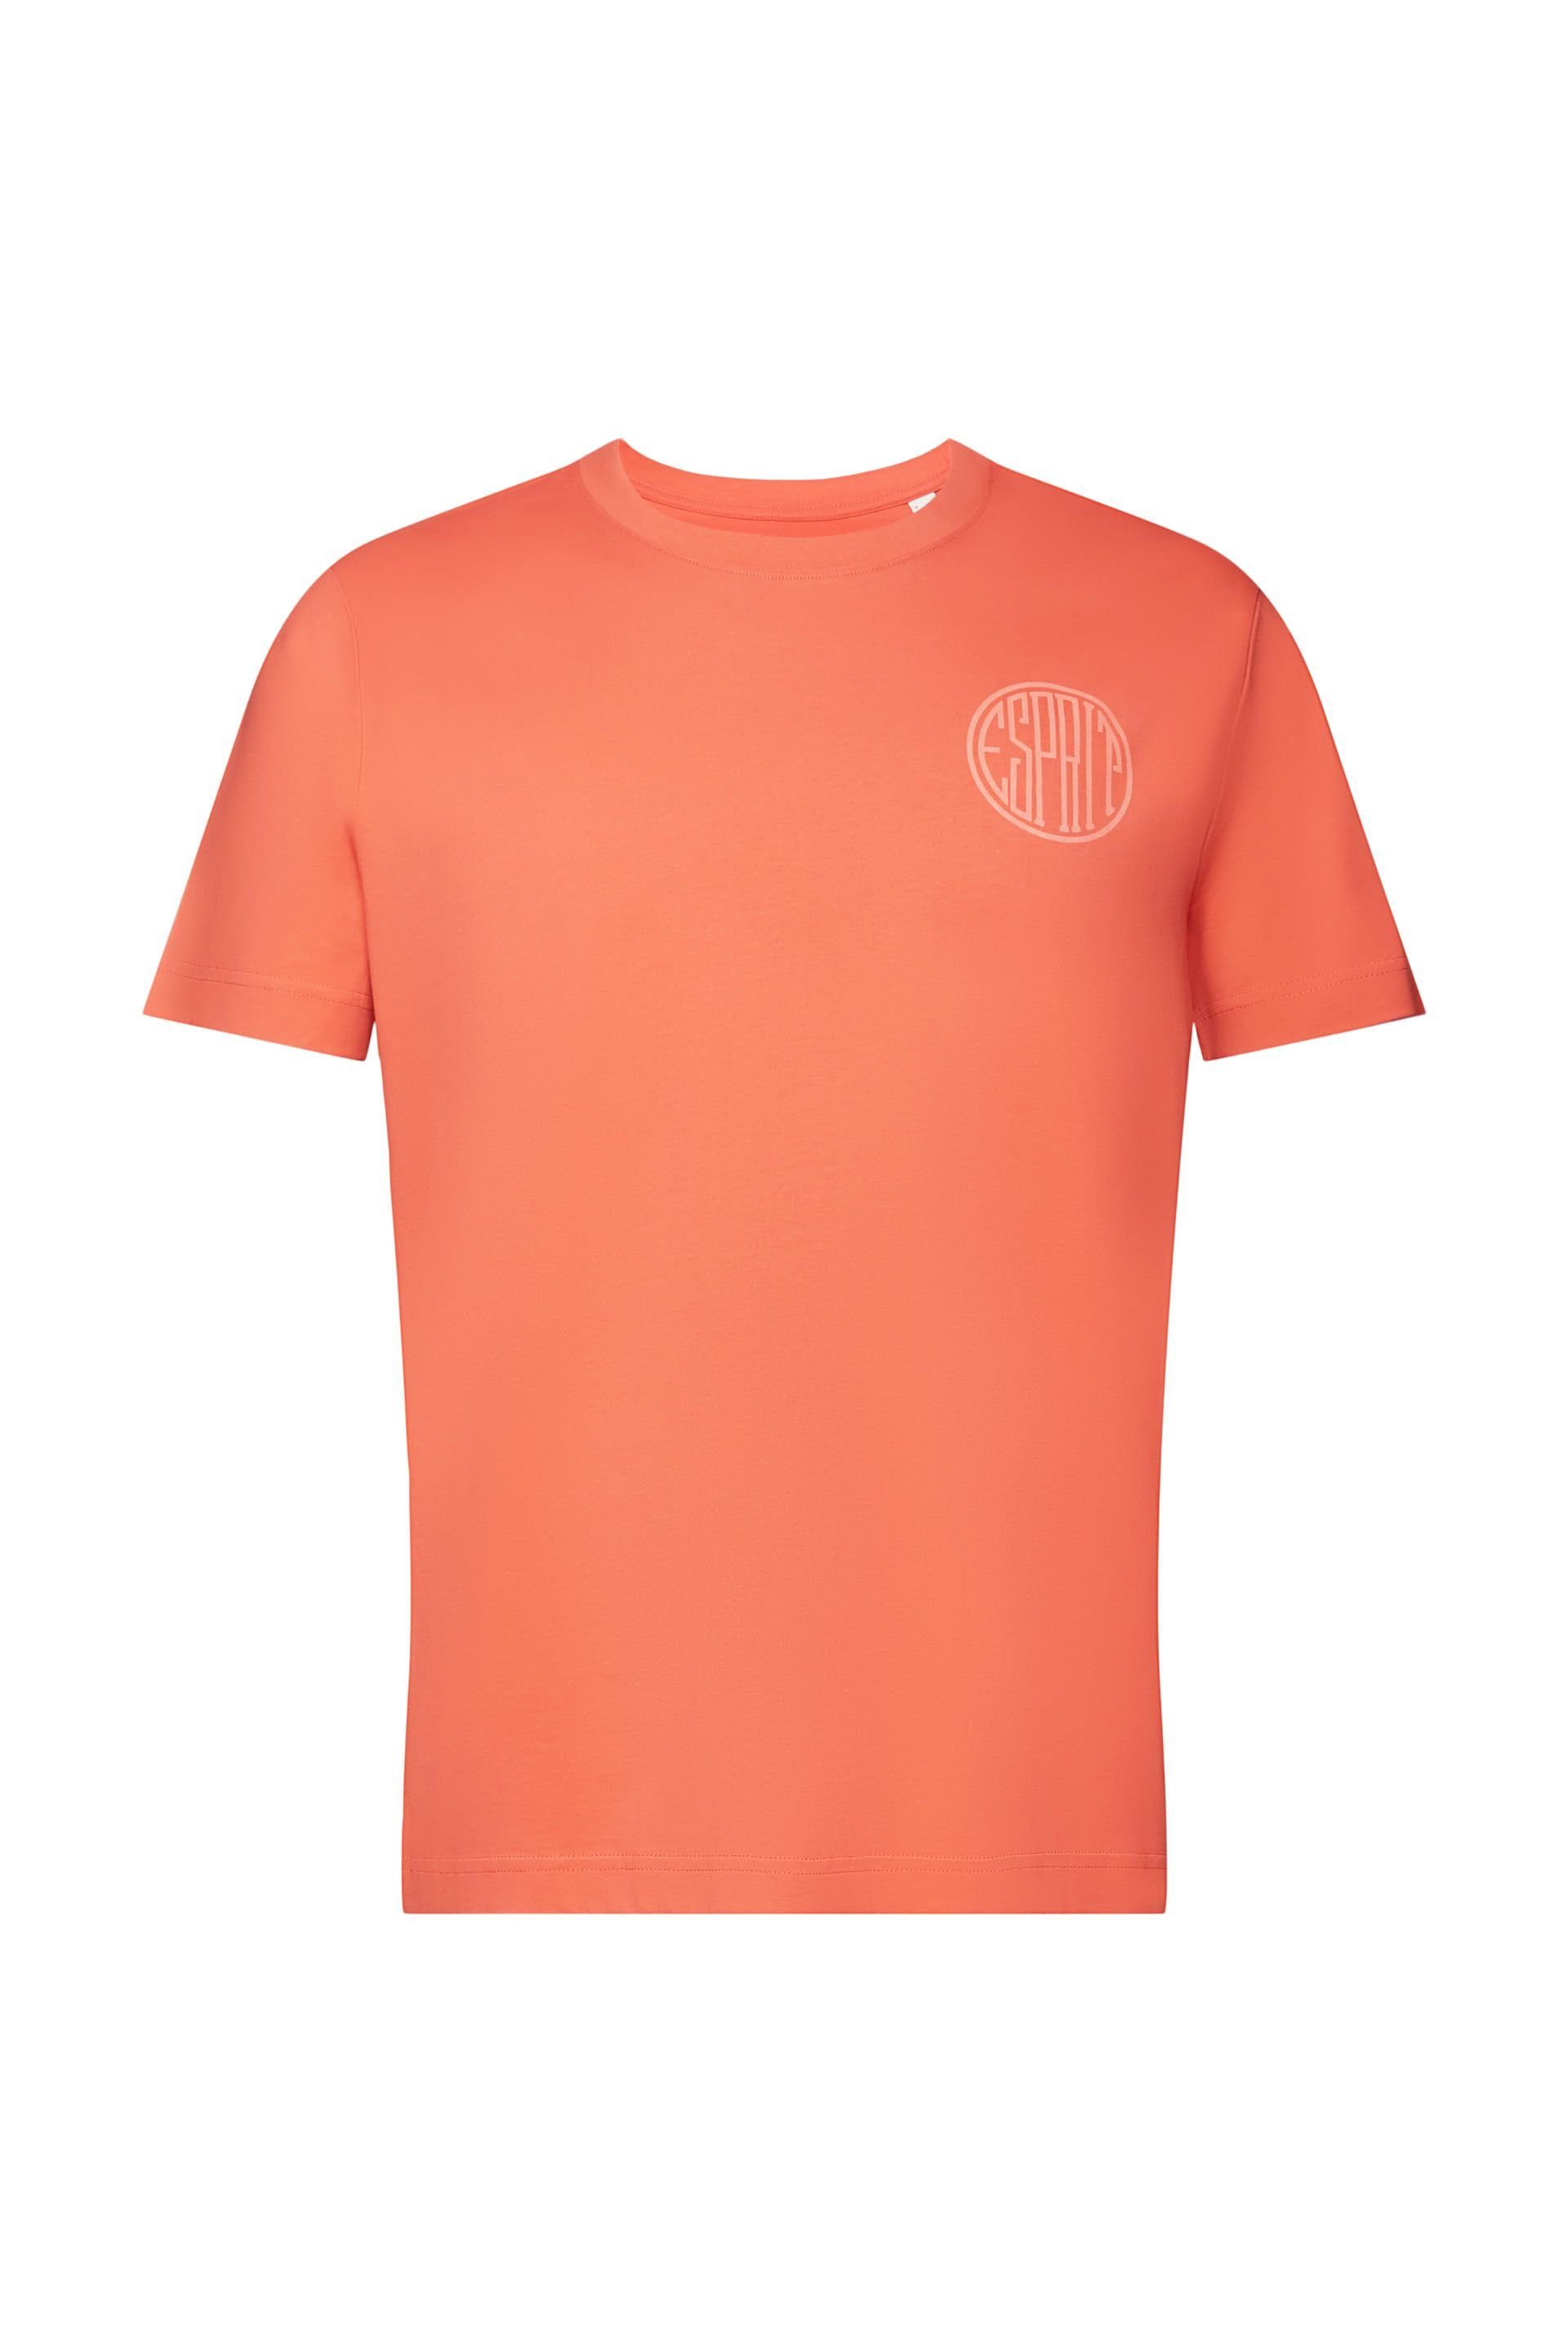 Esprit T-Shirt coral red